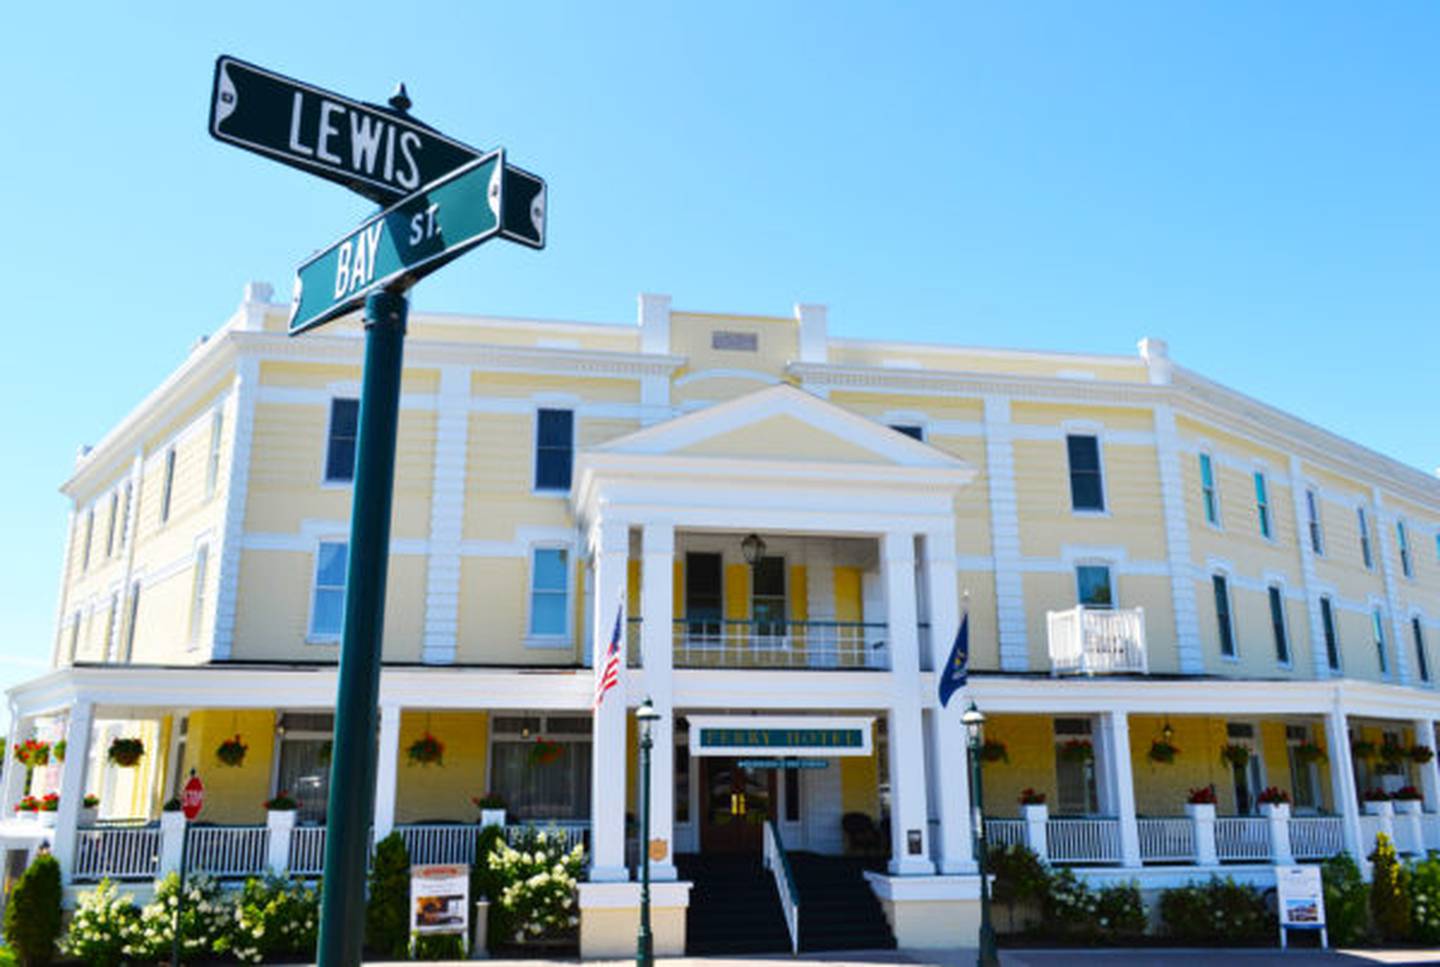 Perry Hotel Summer 2015 600x403